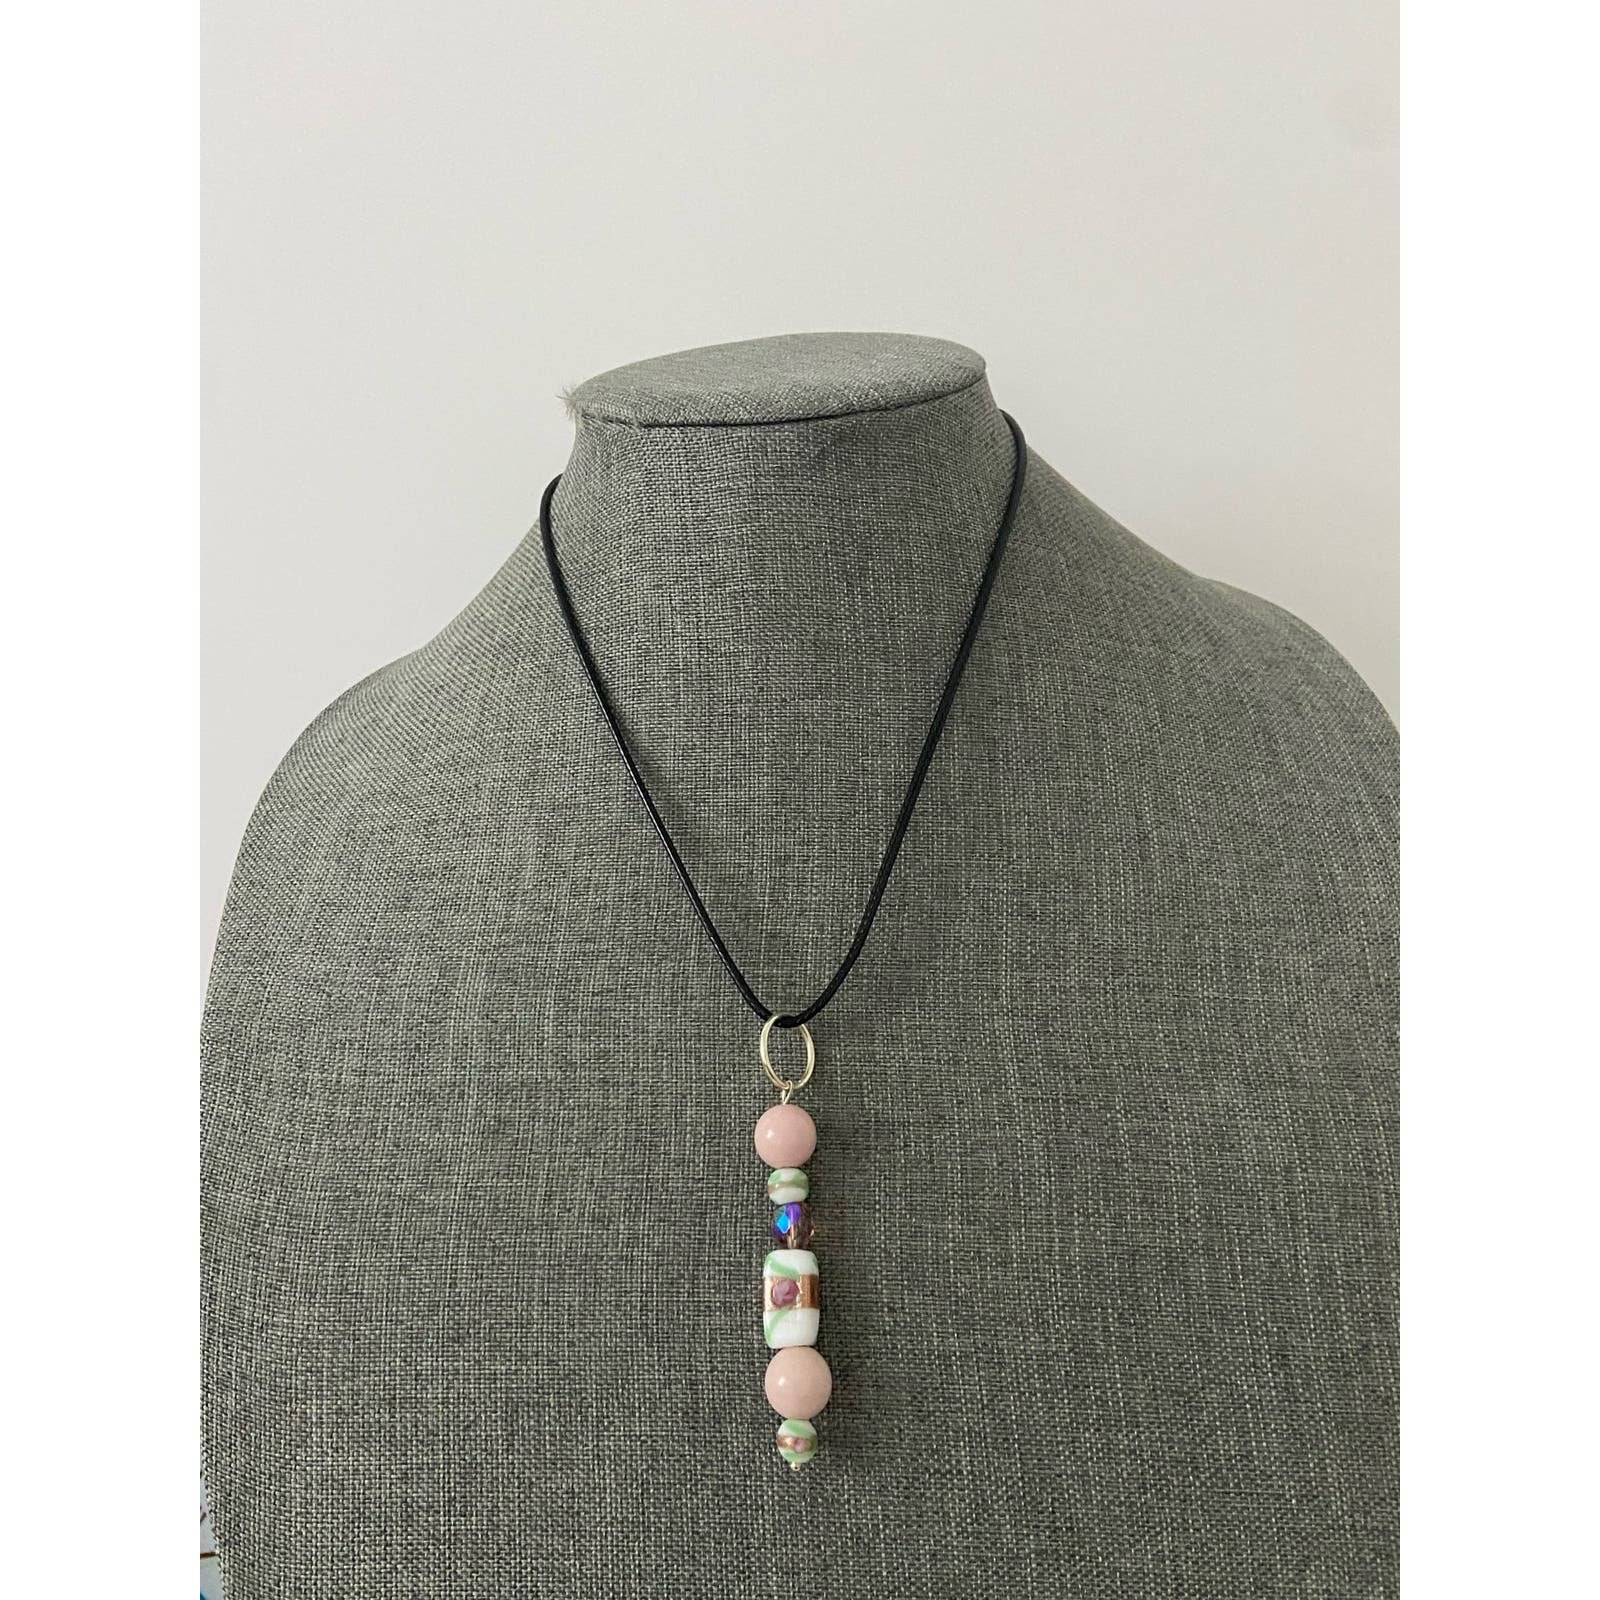 Buy Pink white and green ceramic bead pendant necklace Kckkfhbfd hot sale